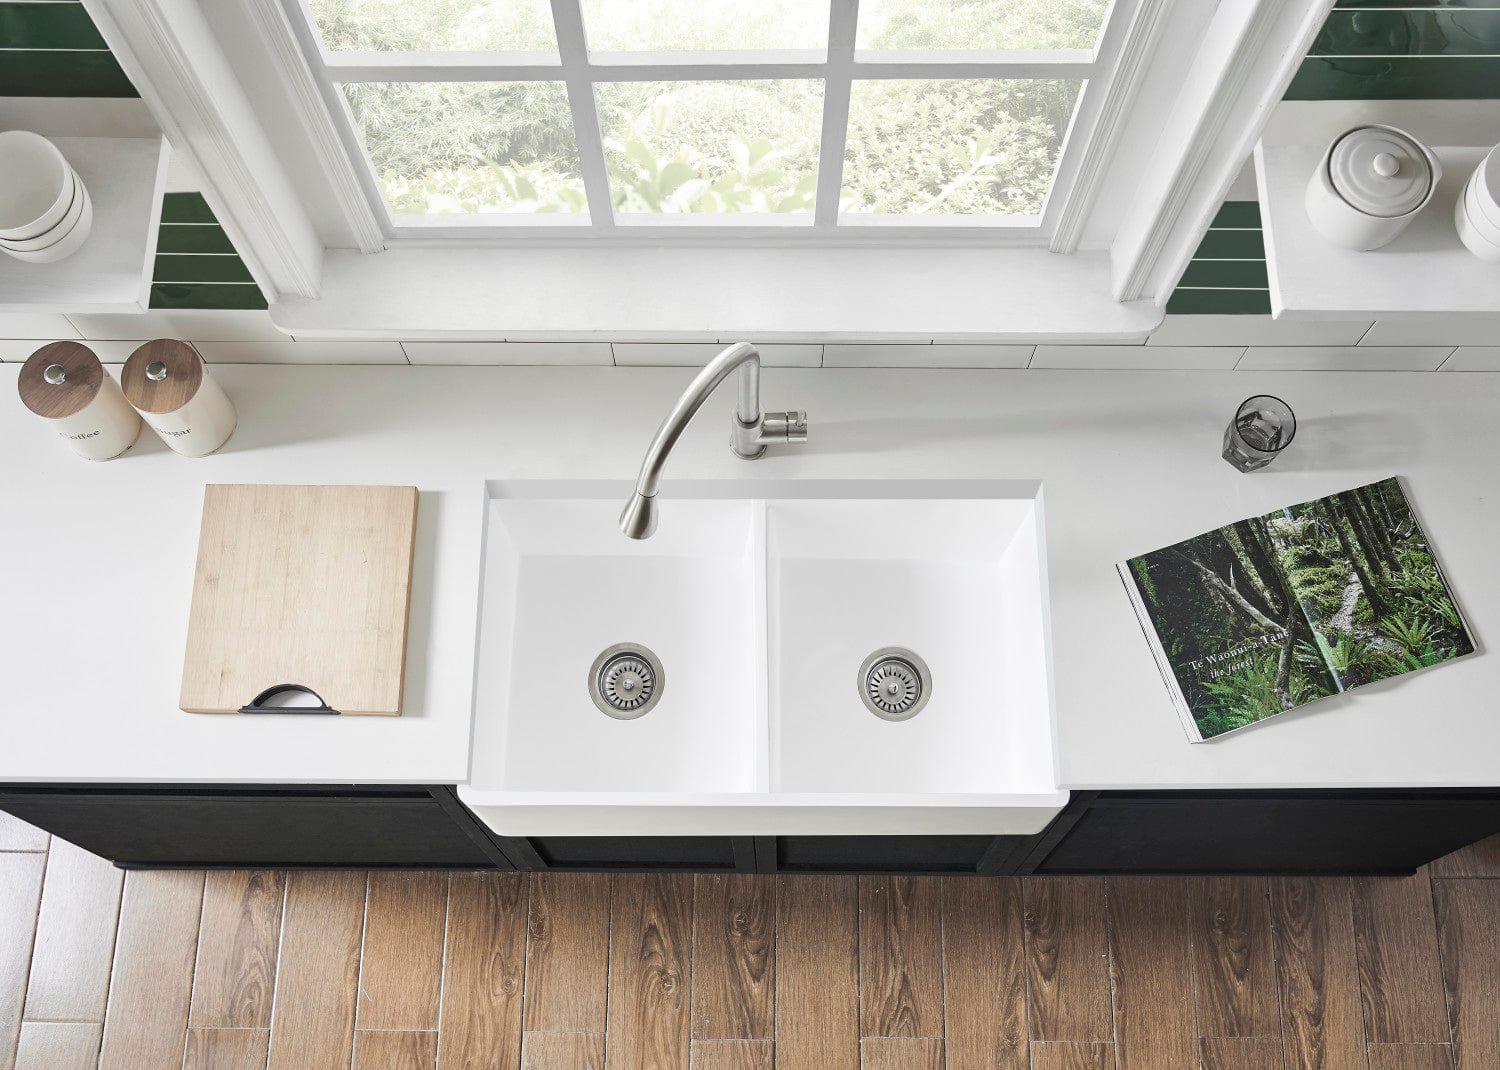 KINGSTON Brass Gourmetier 33" Solid Surface Double Bowl Kitchen Sink - Matte White